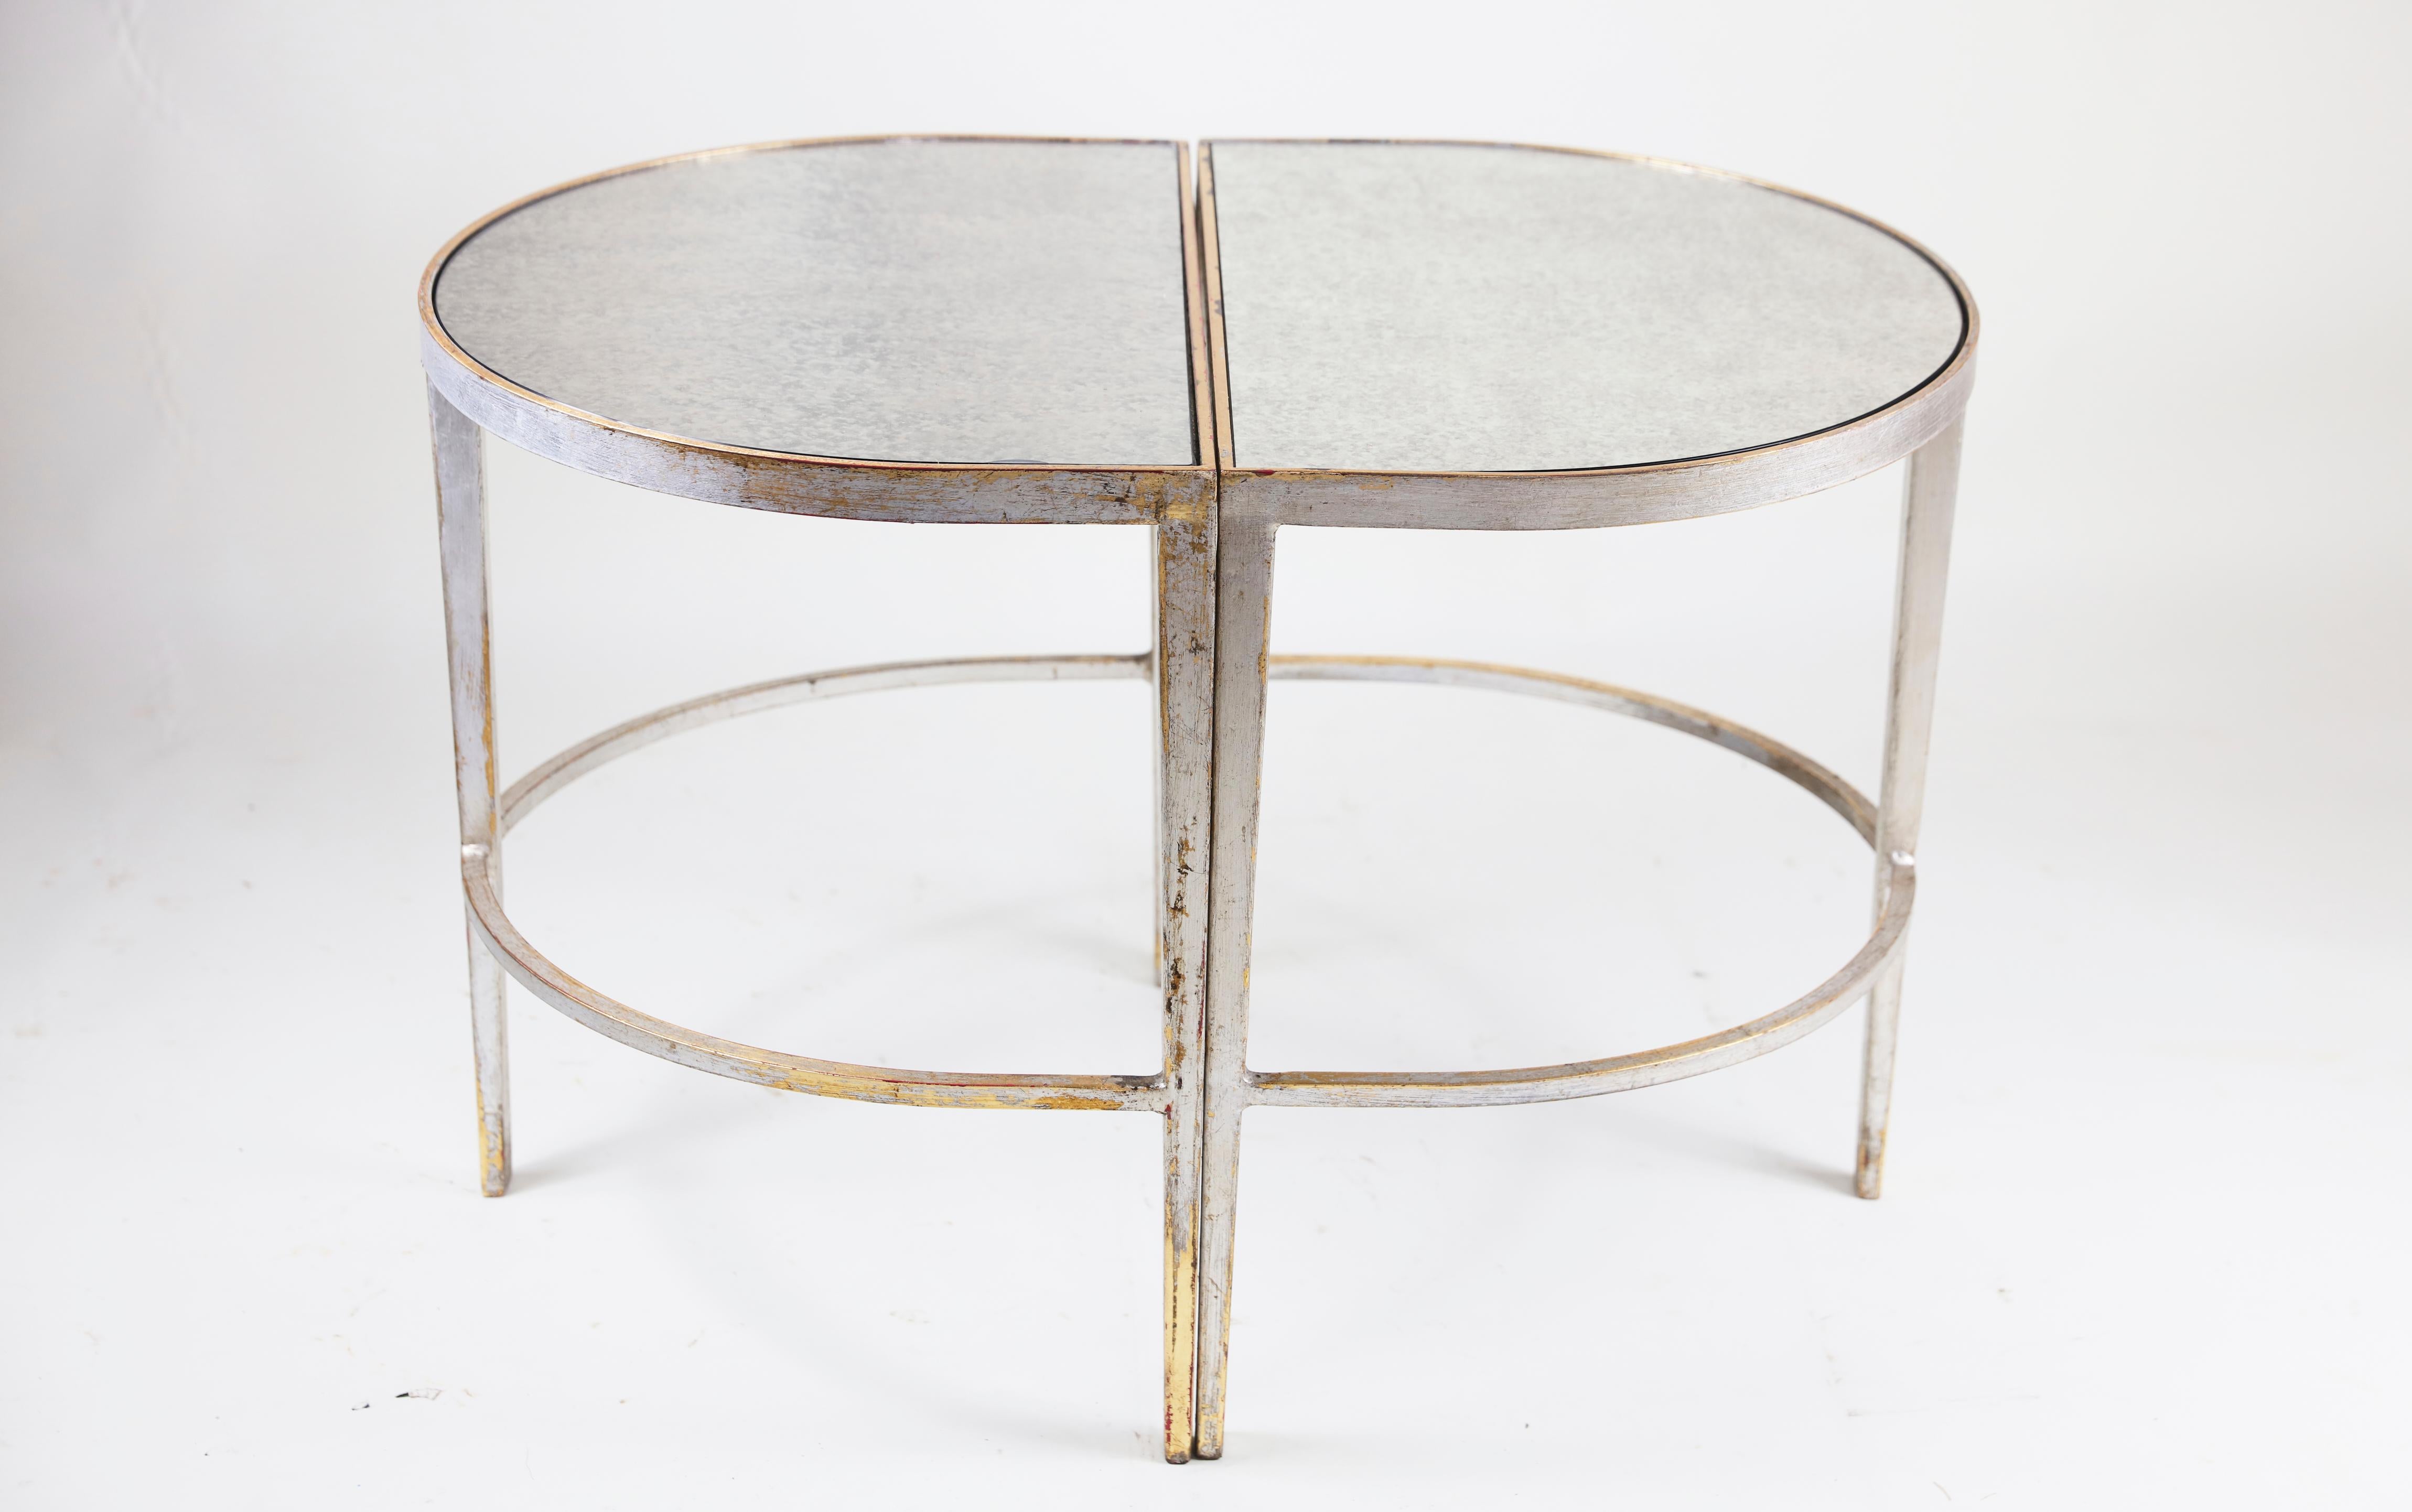 Women's or Men's Silver & Gold Mirrored Cocktail Table 3 Pieces